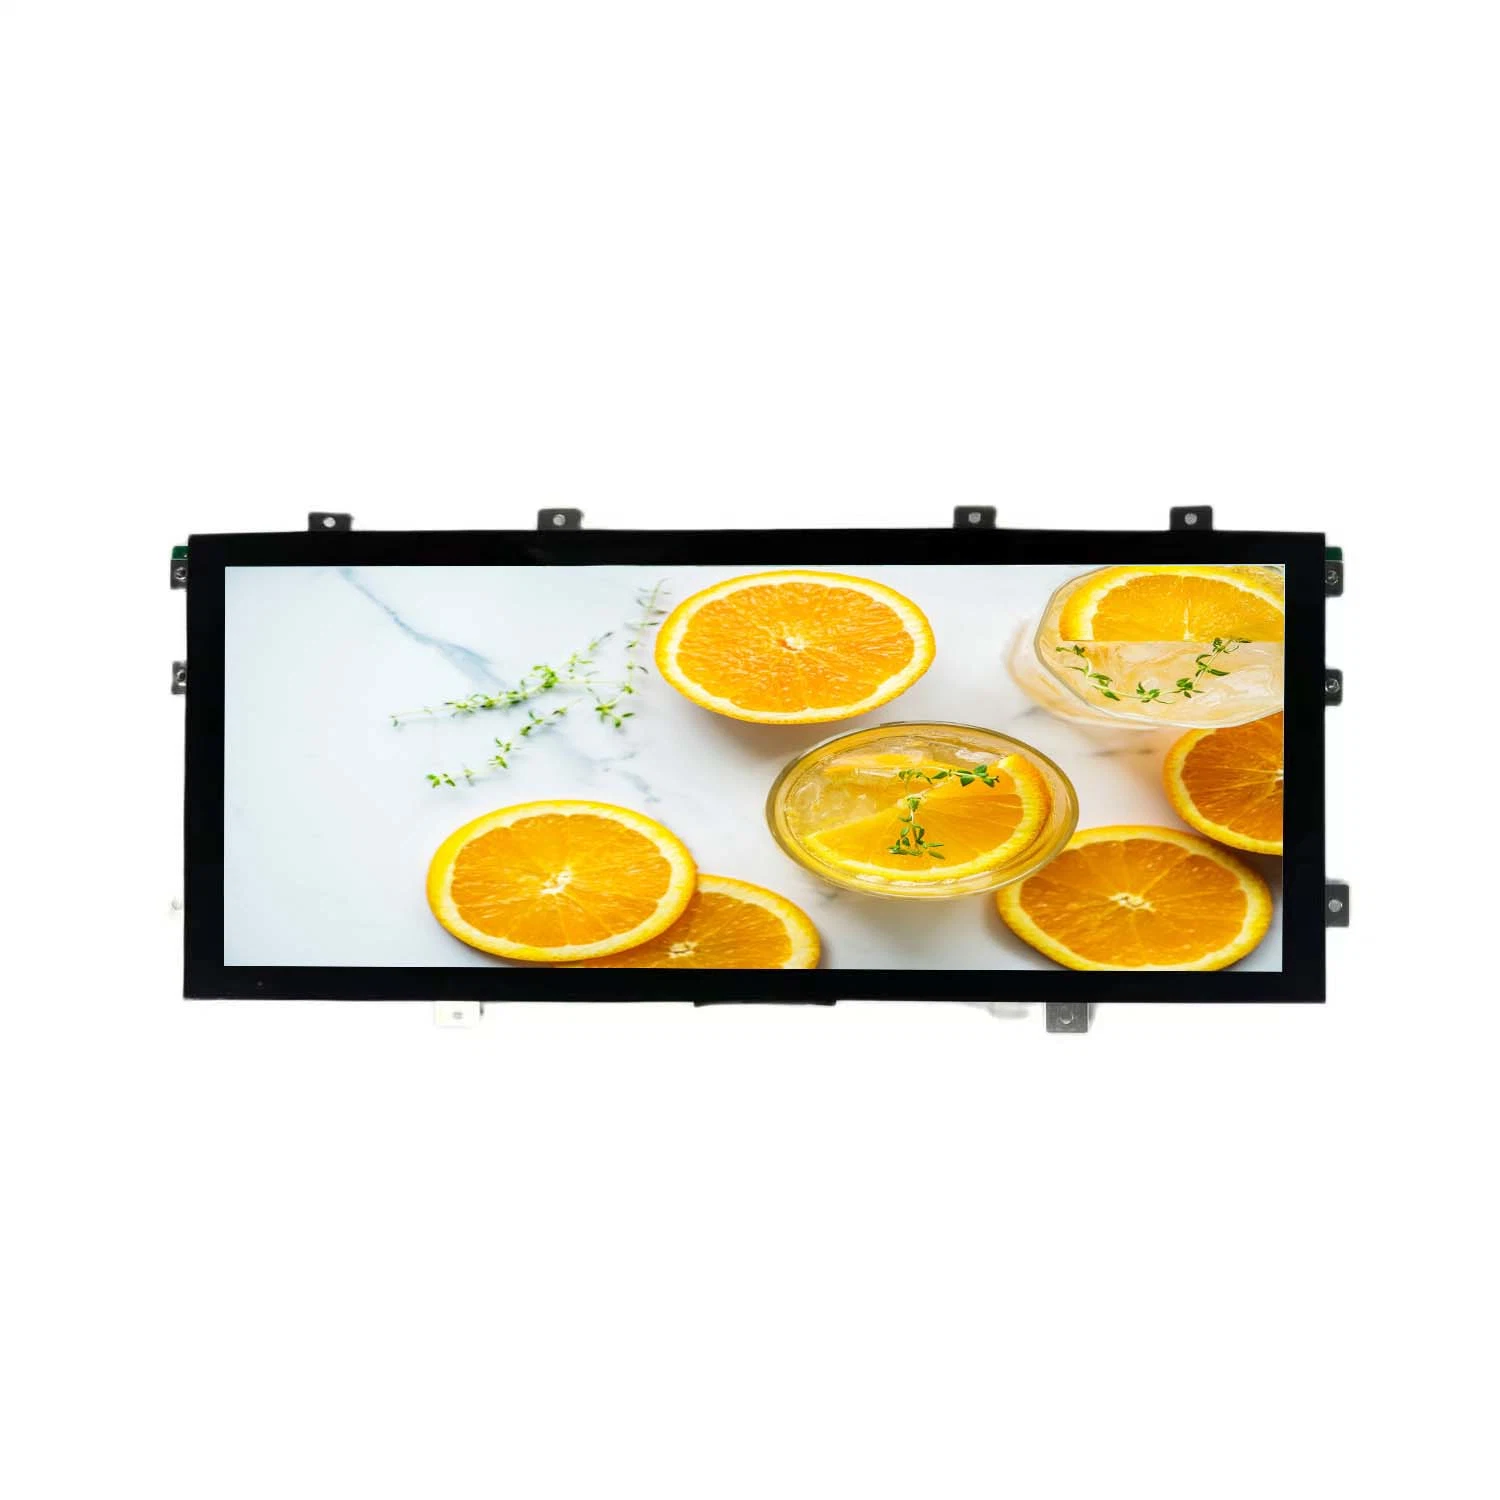 12.3 Inch IPS 1920*720 Resolution TFT LCD Display Module with Spi Interface Touch Screen and PCBA